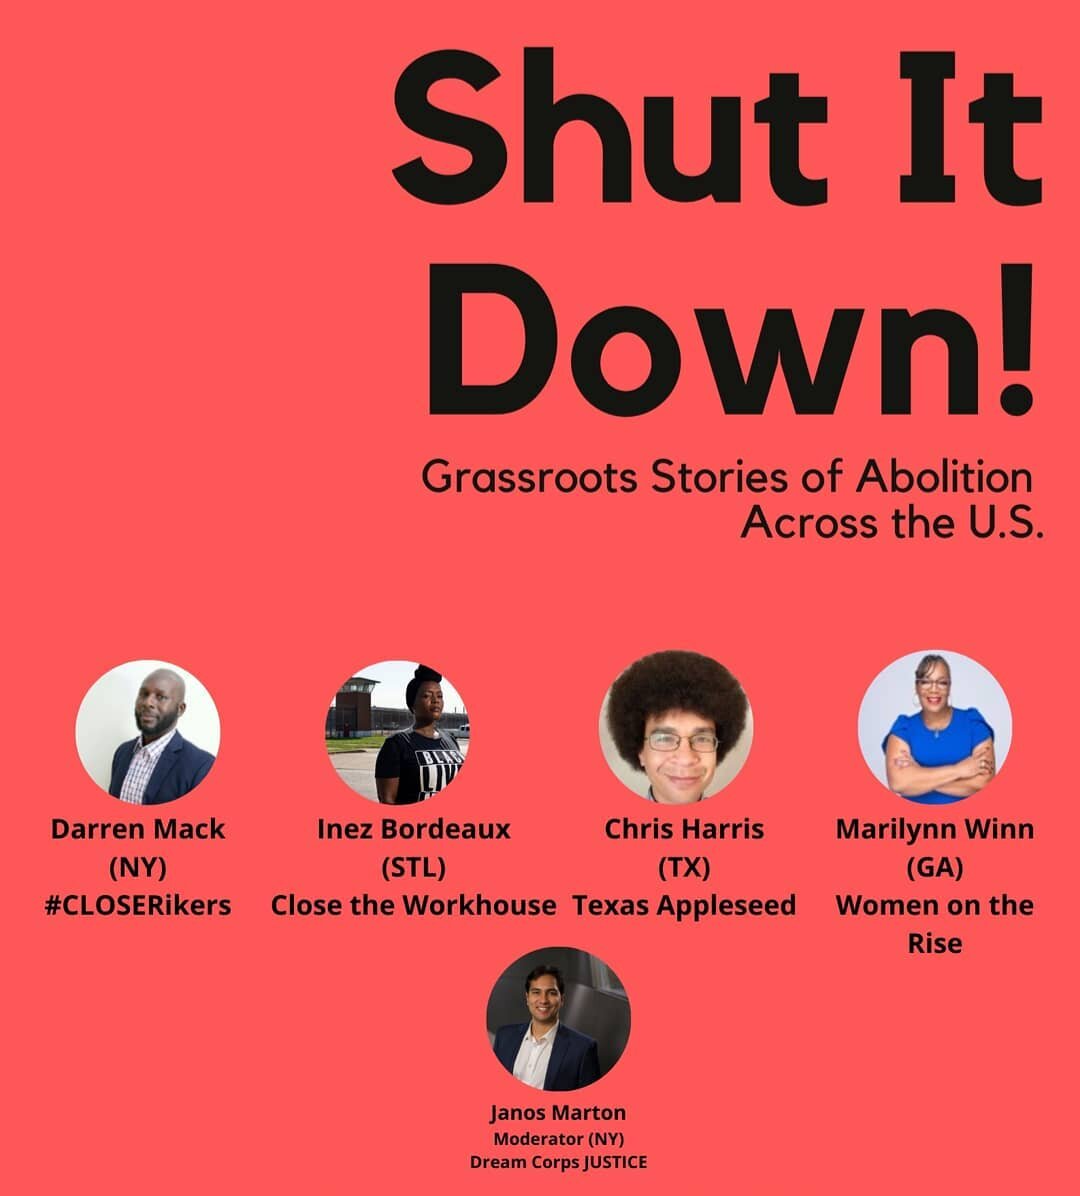 Tomorrow night we are talking about #closingjails with four bad-ass organizers from across the country. 
Registration link in my bio.
#CLOSErikers #ClosetheWorkhouse #shutitdown